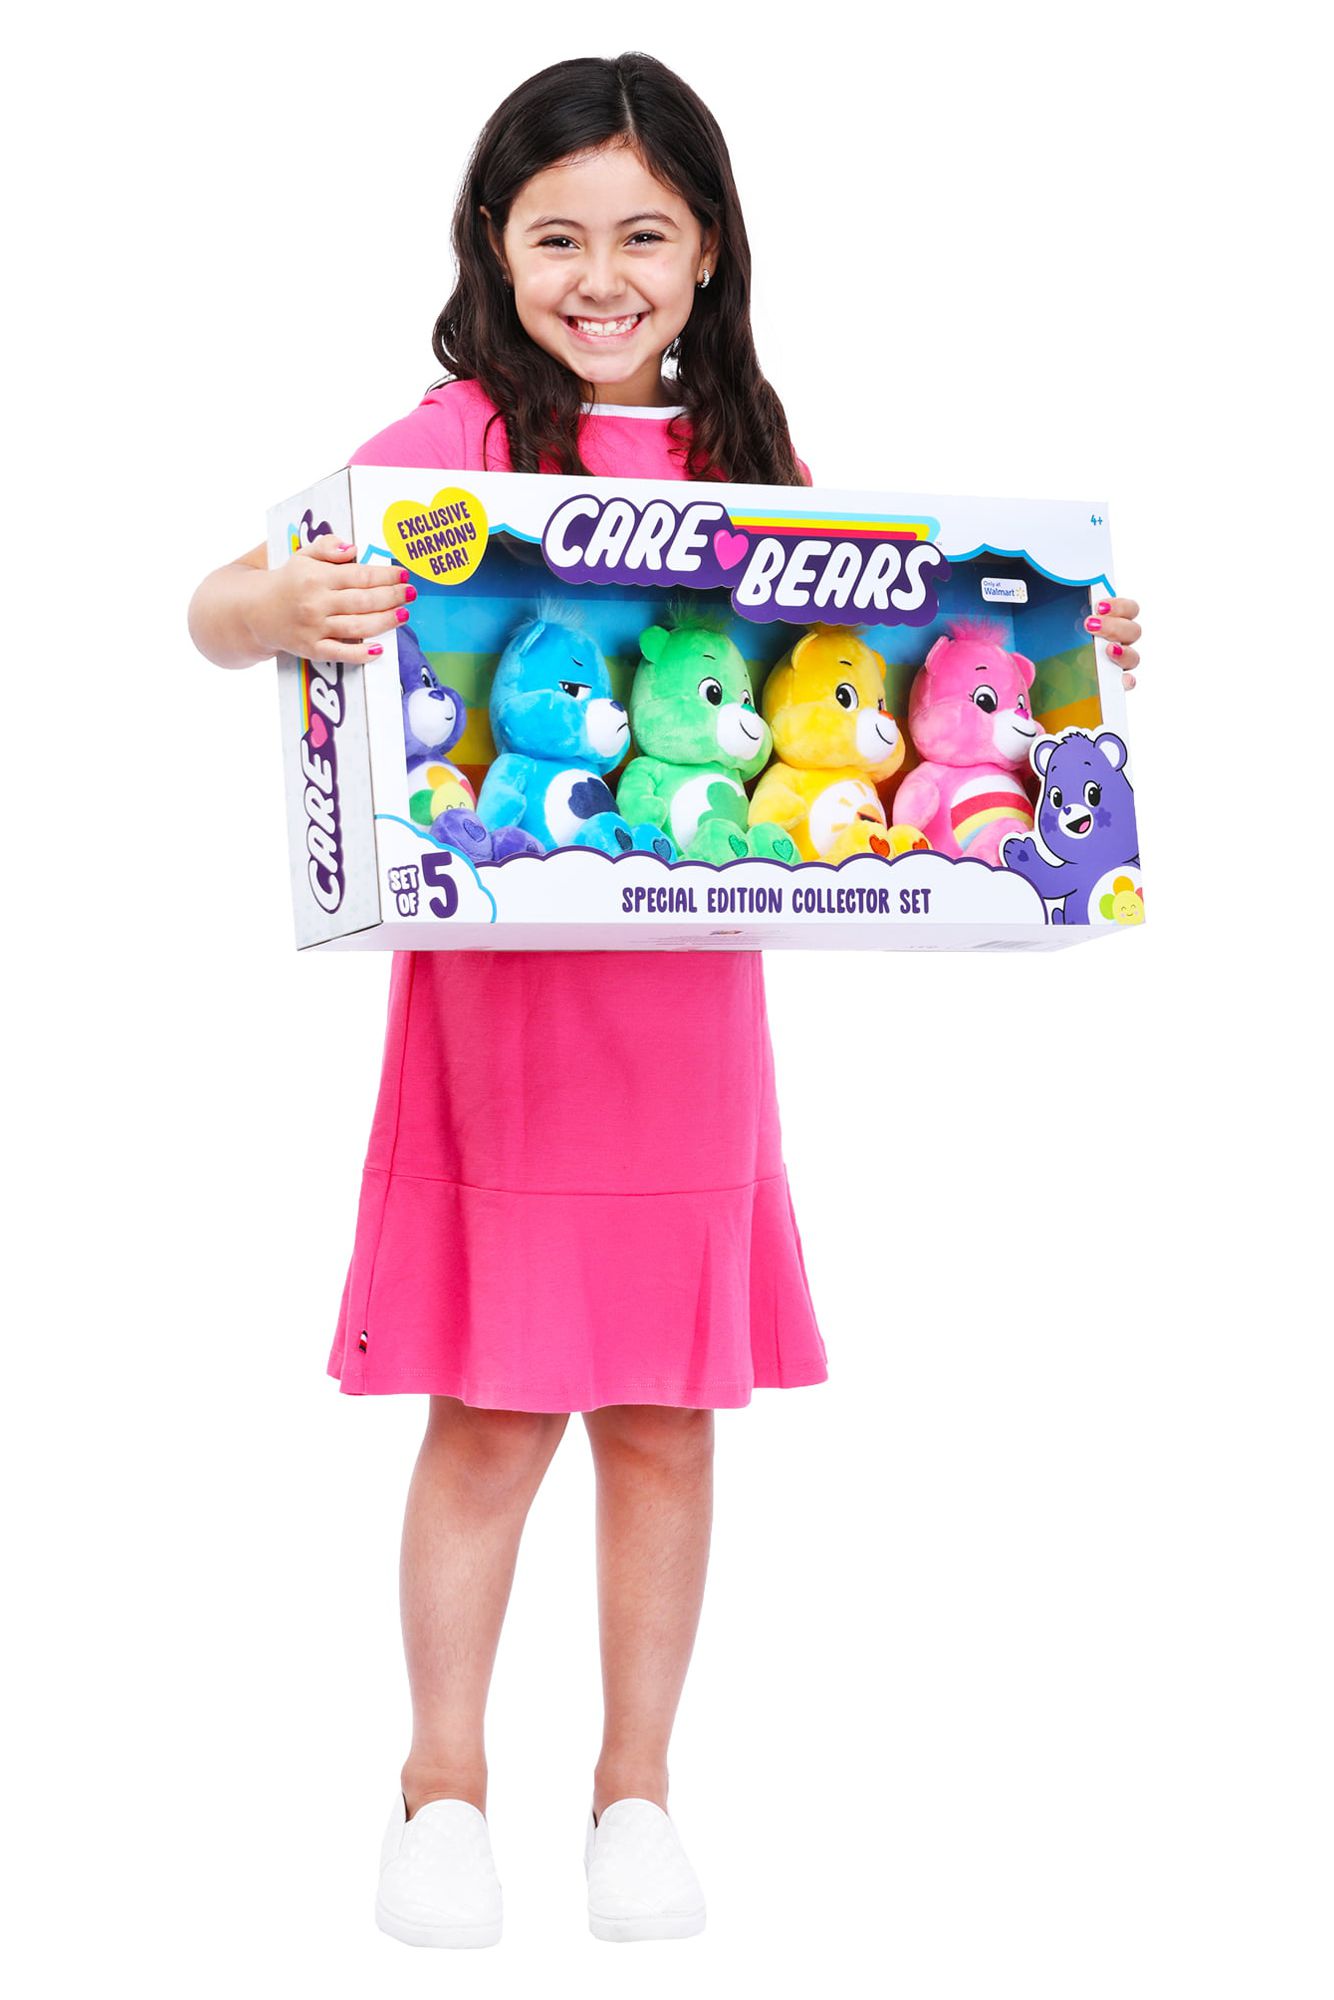 Care Bears - 9" Bean Plush - Special Collector Set - Exclusive Harmony Bear Included! - image 2 of 9